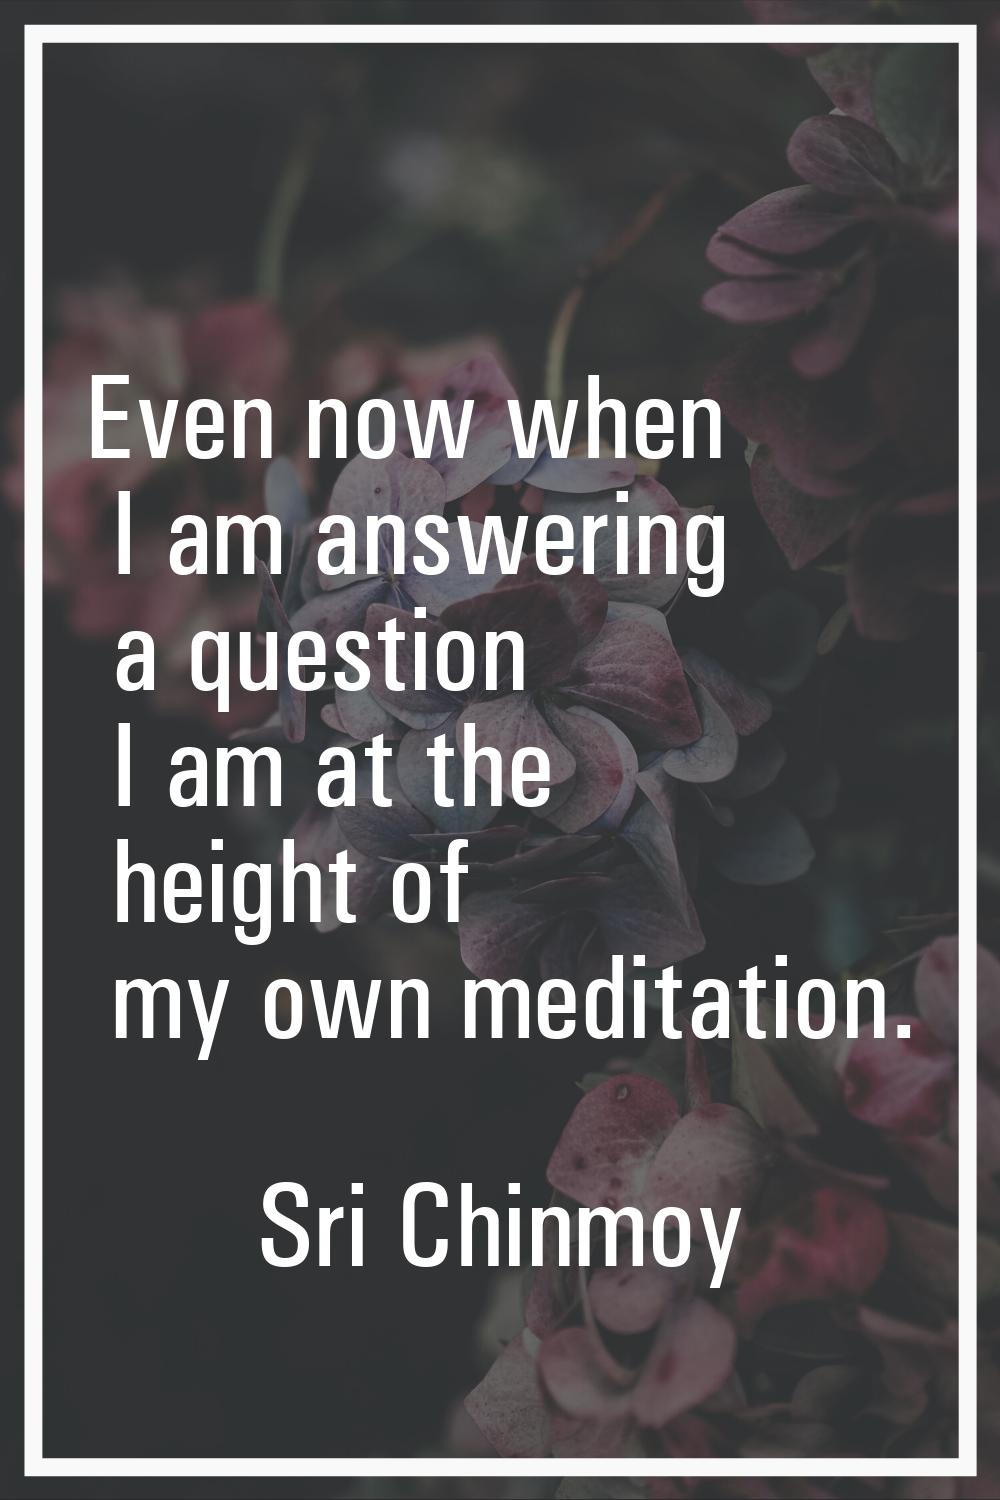 Even now when I am answering a question I am at the height of my own meditation.